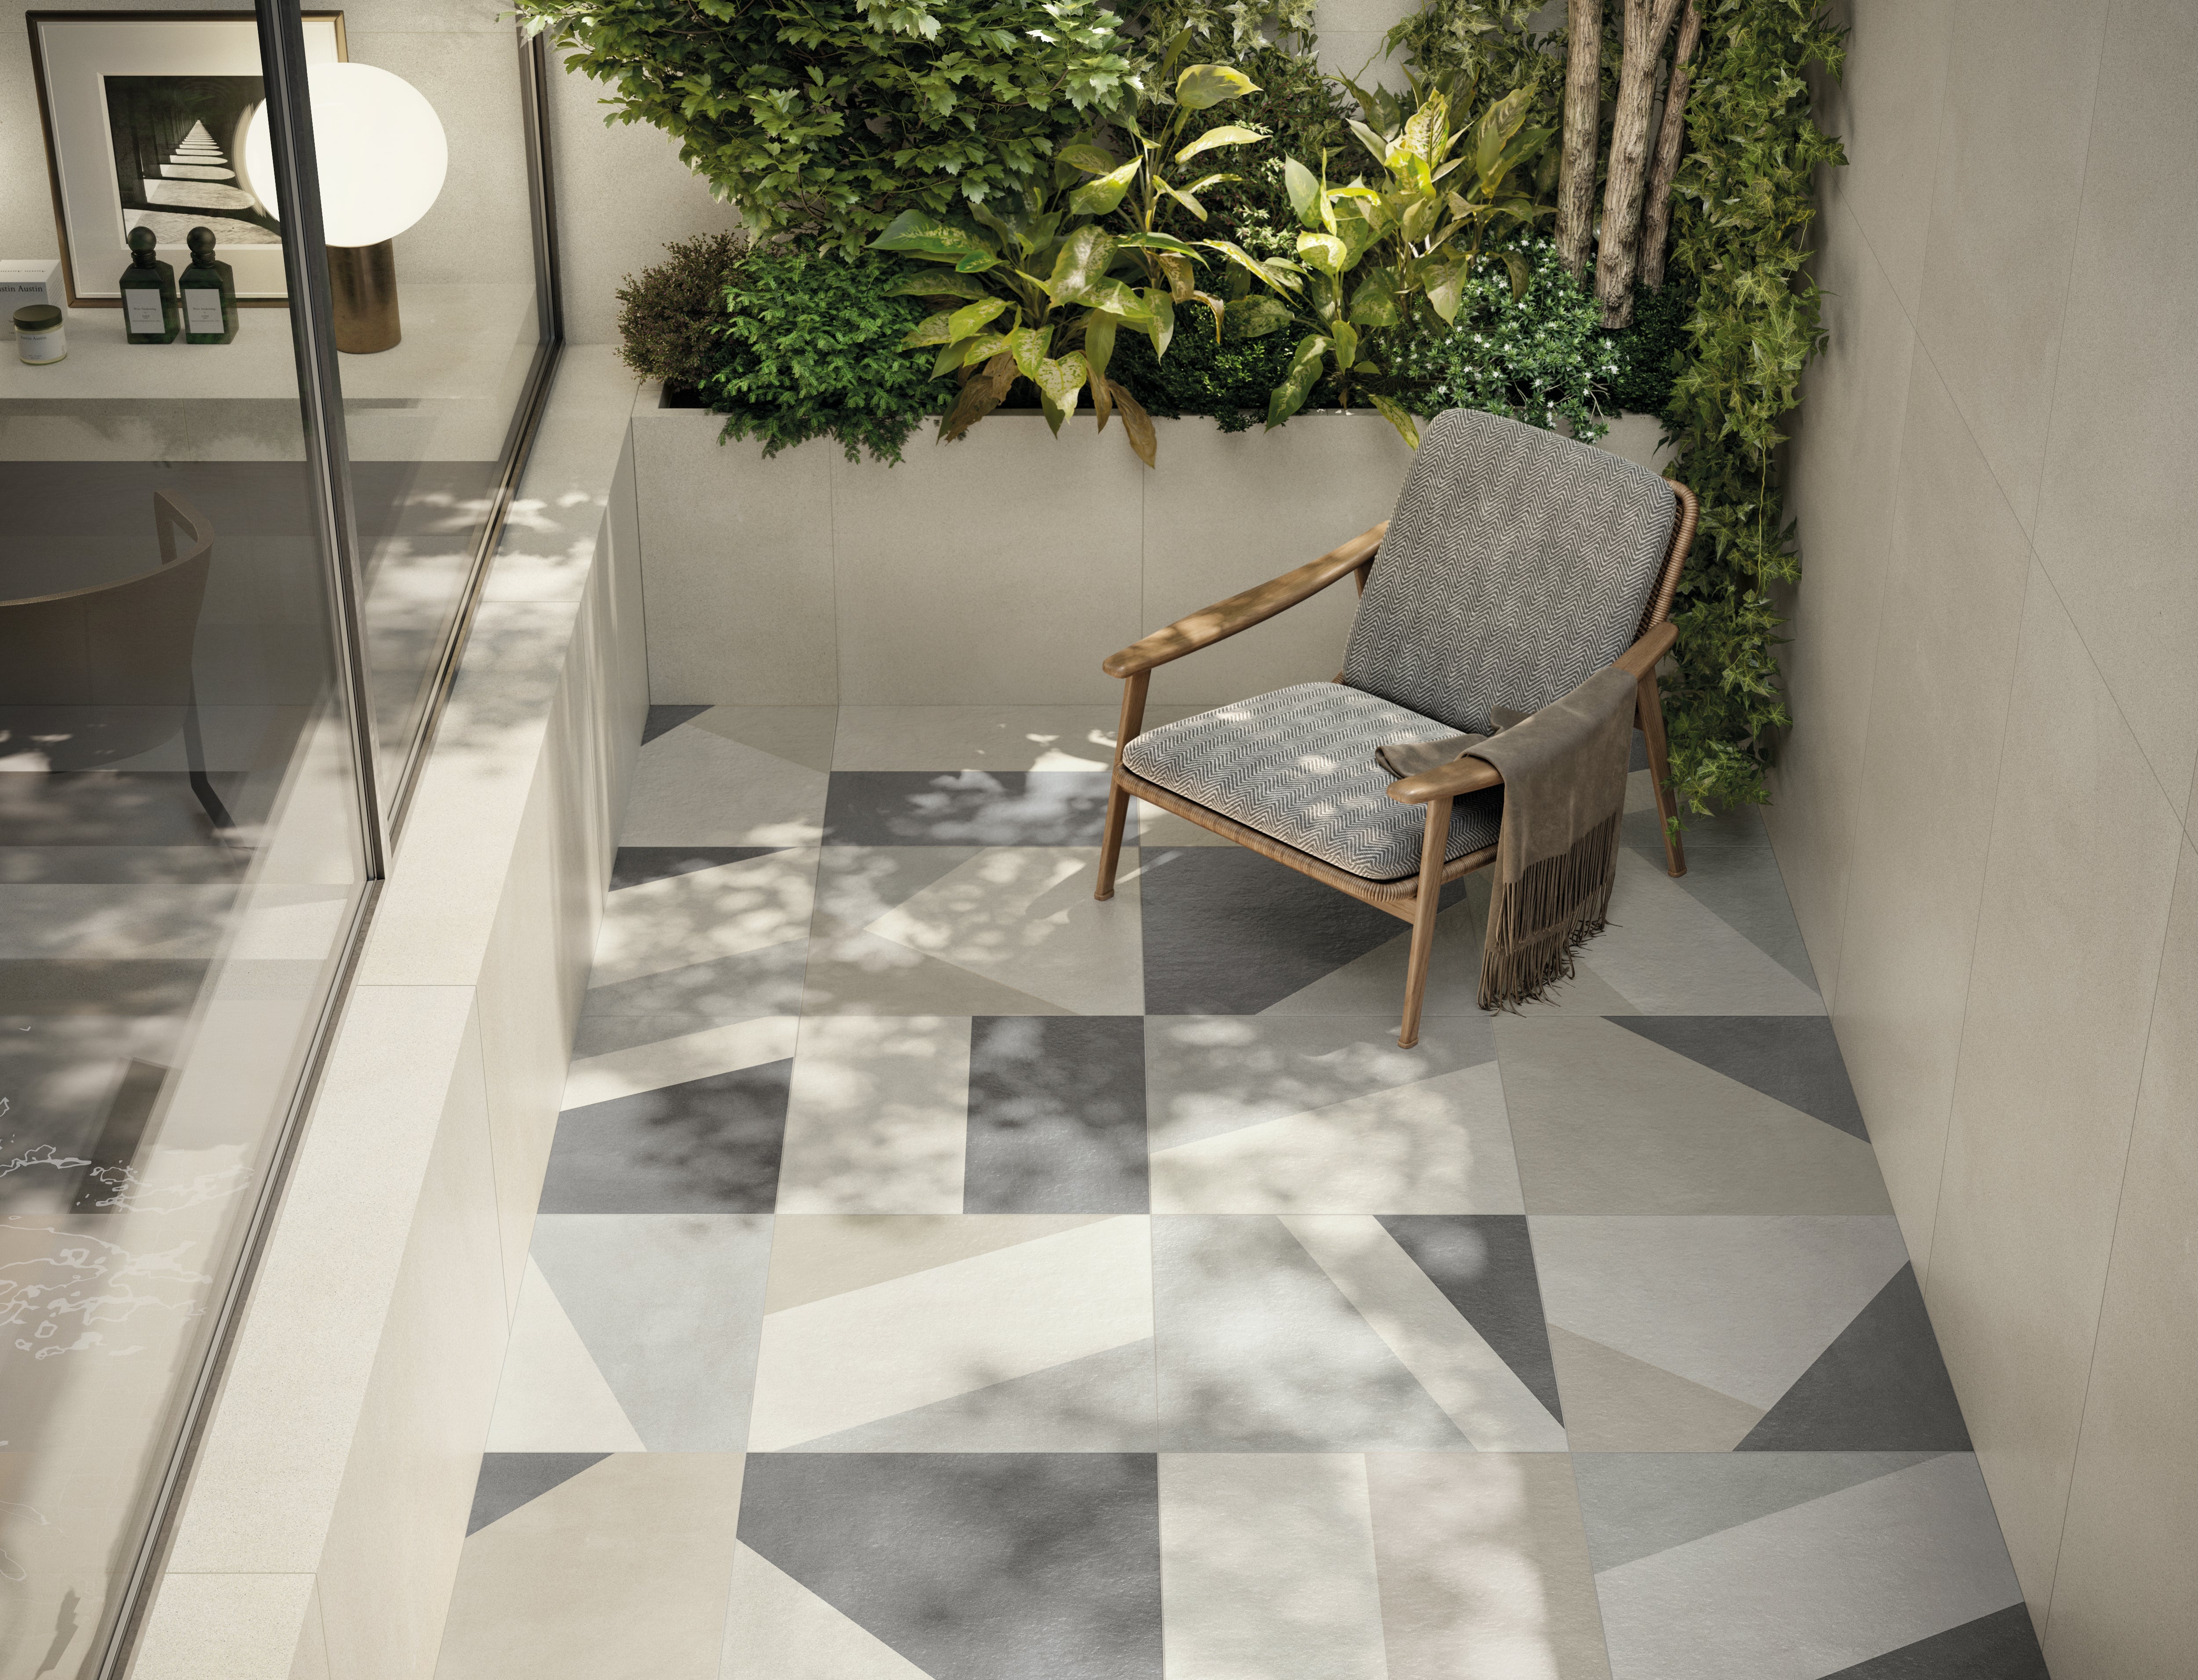 Luxury porcelain tile collection from Surface Group featuring geometric pattern in a modern living space with natural light and greenery.